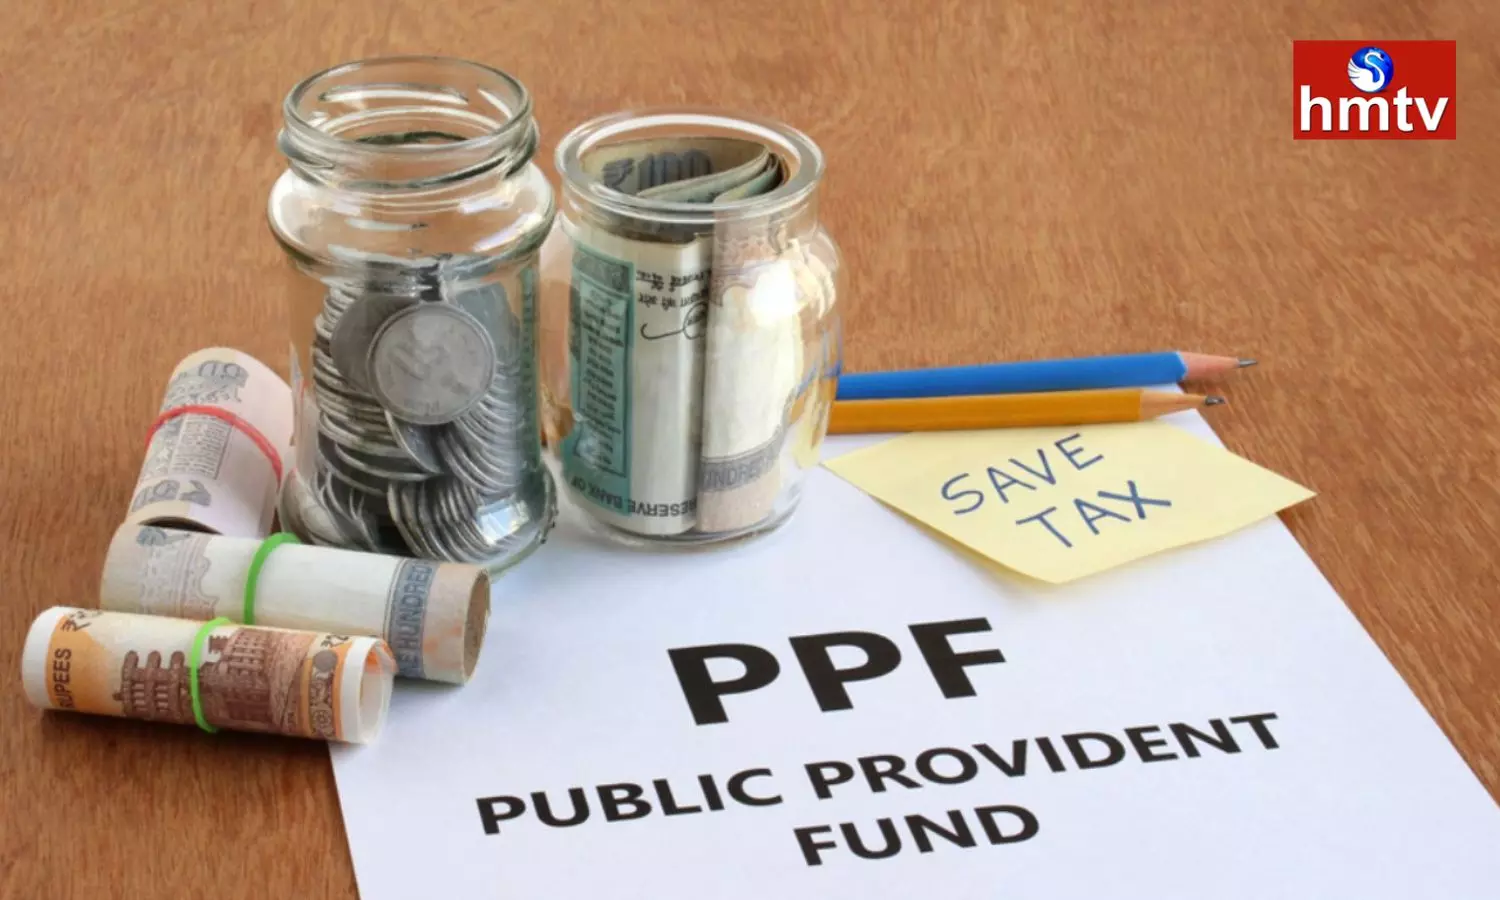 If You Invest In Public Provident Fund You Will Become The Owner Of 2.25 Crore